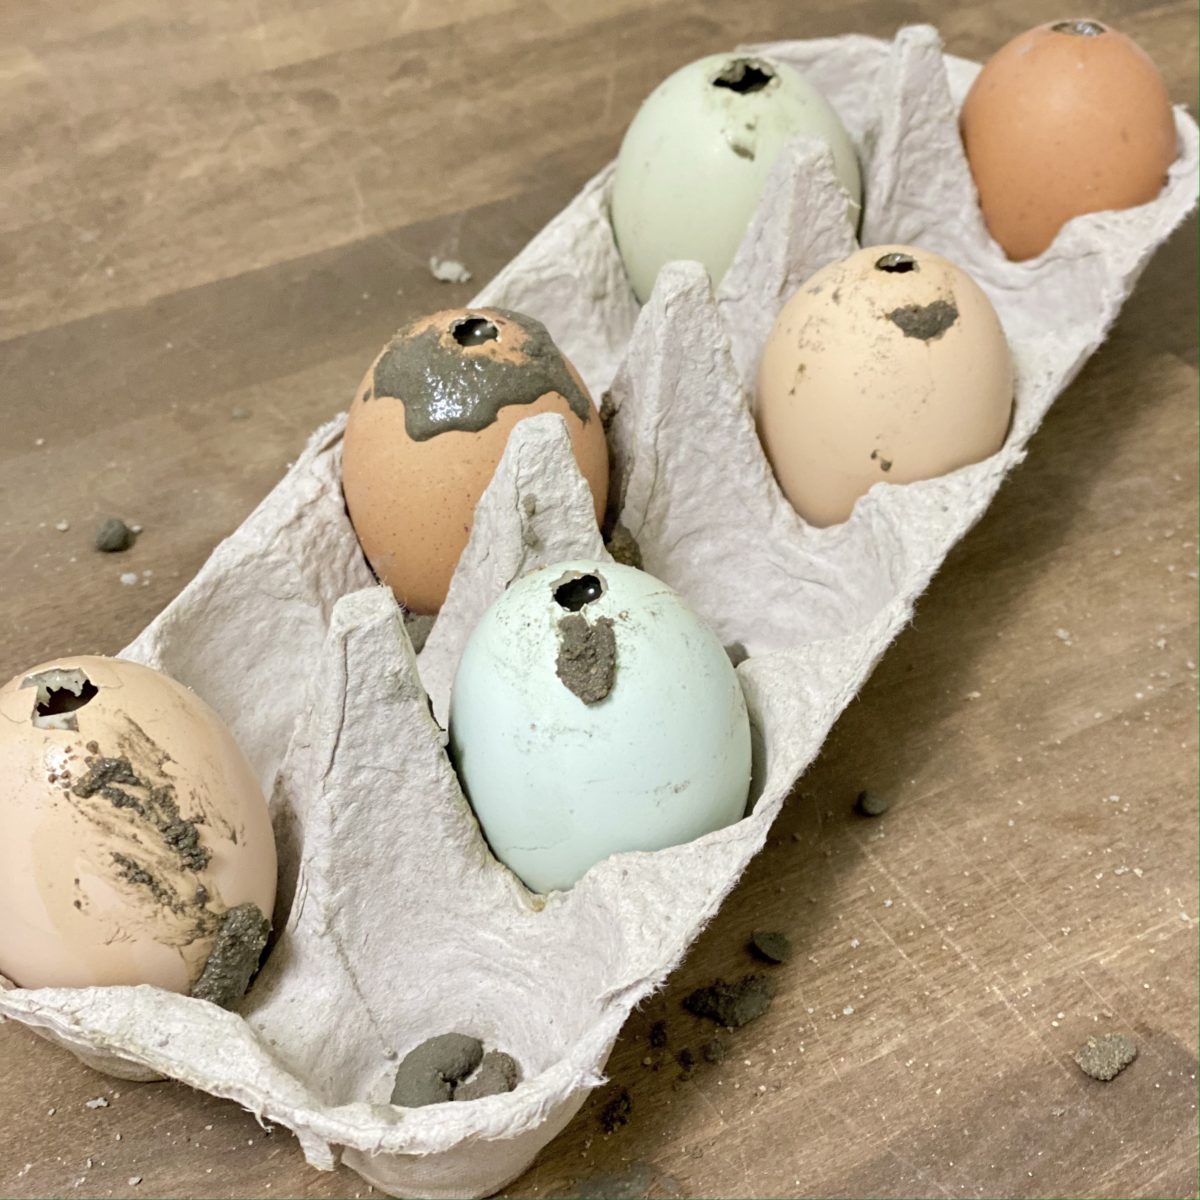 Eggs in carton with concrete poured in them waiting to set and dry.